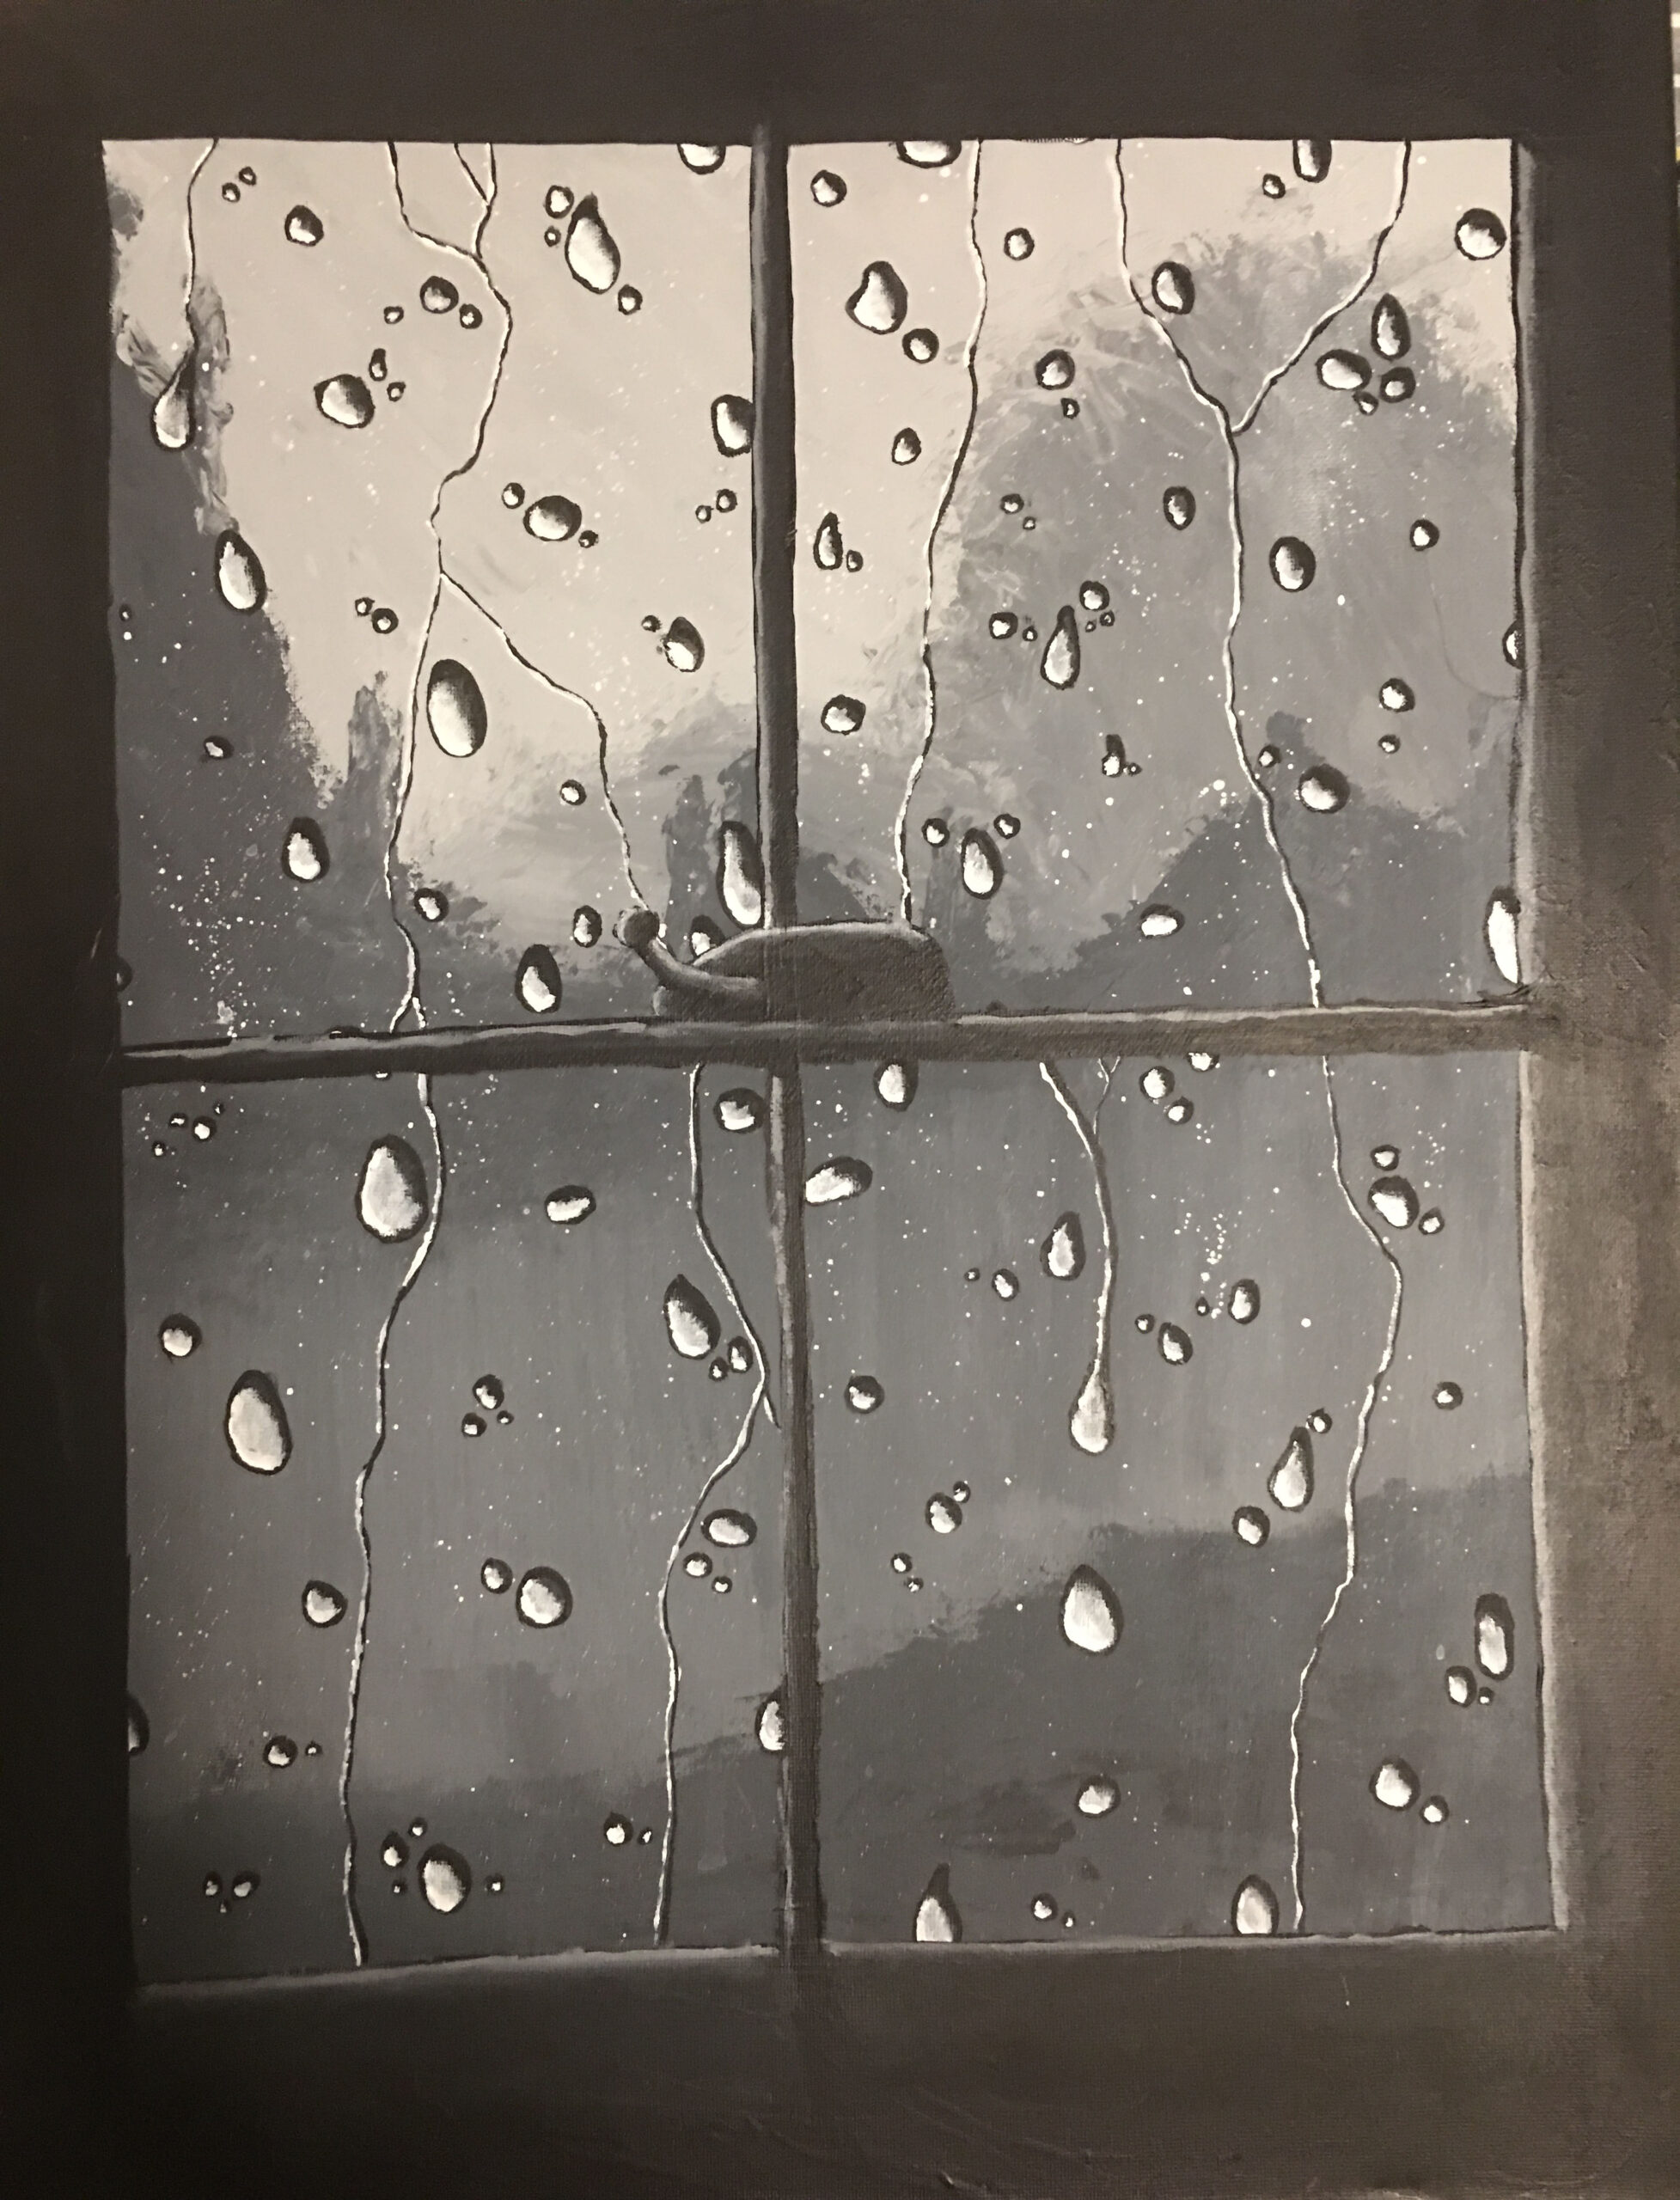 A painting of a window with raindrops on it overlooking a forest